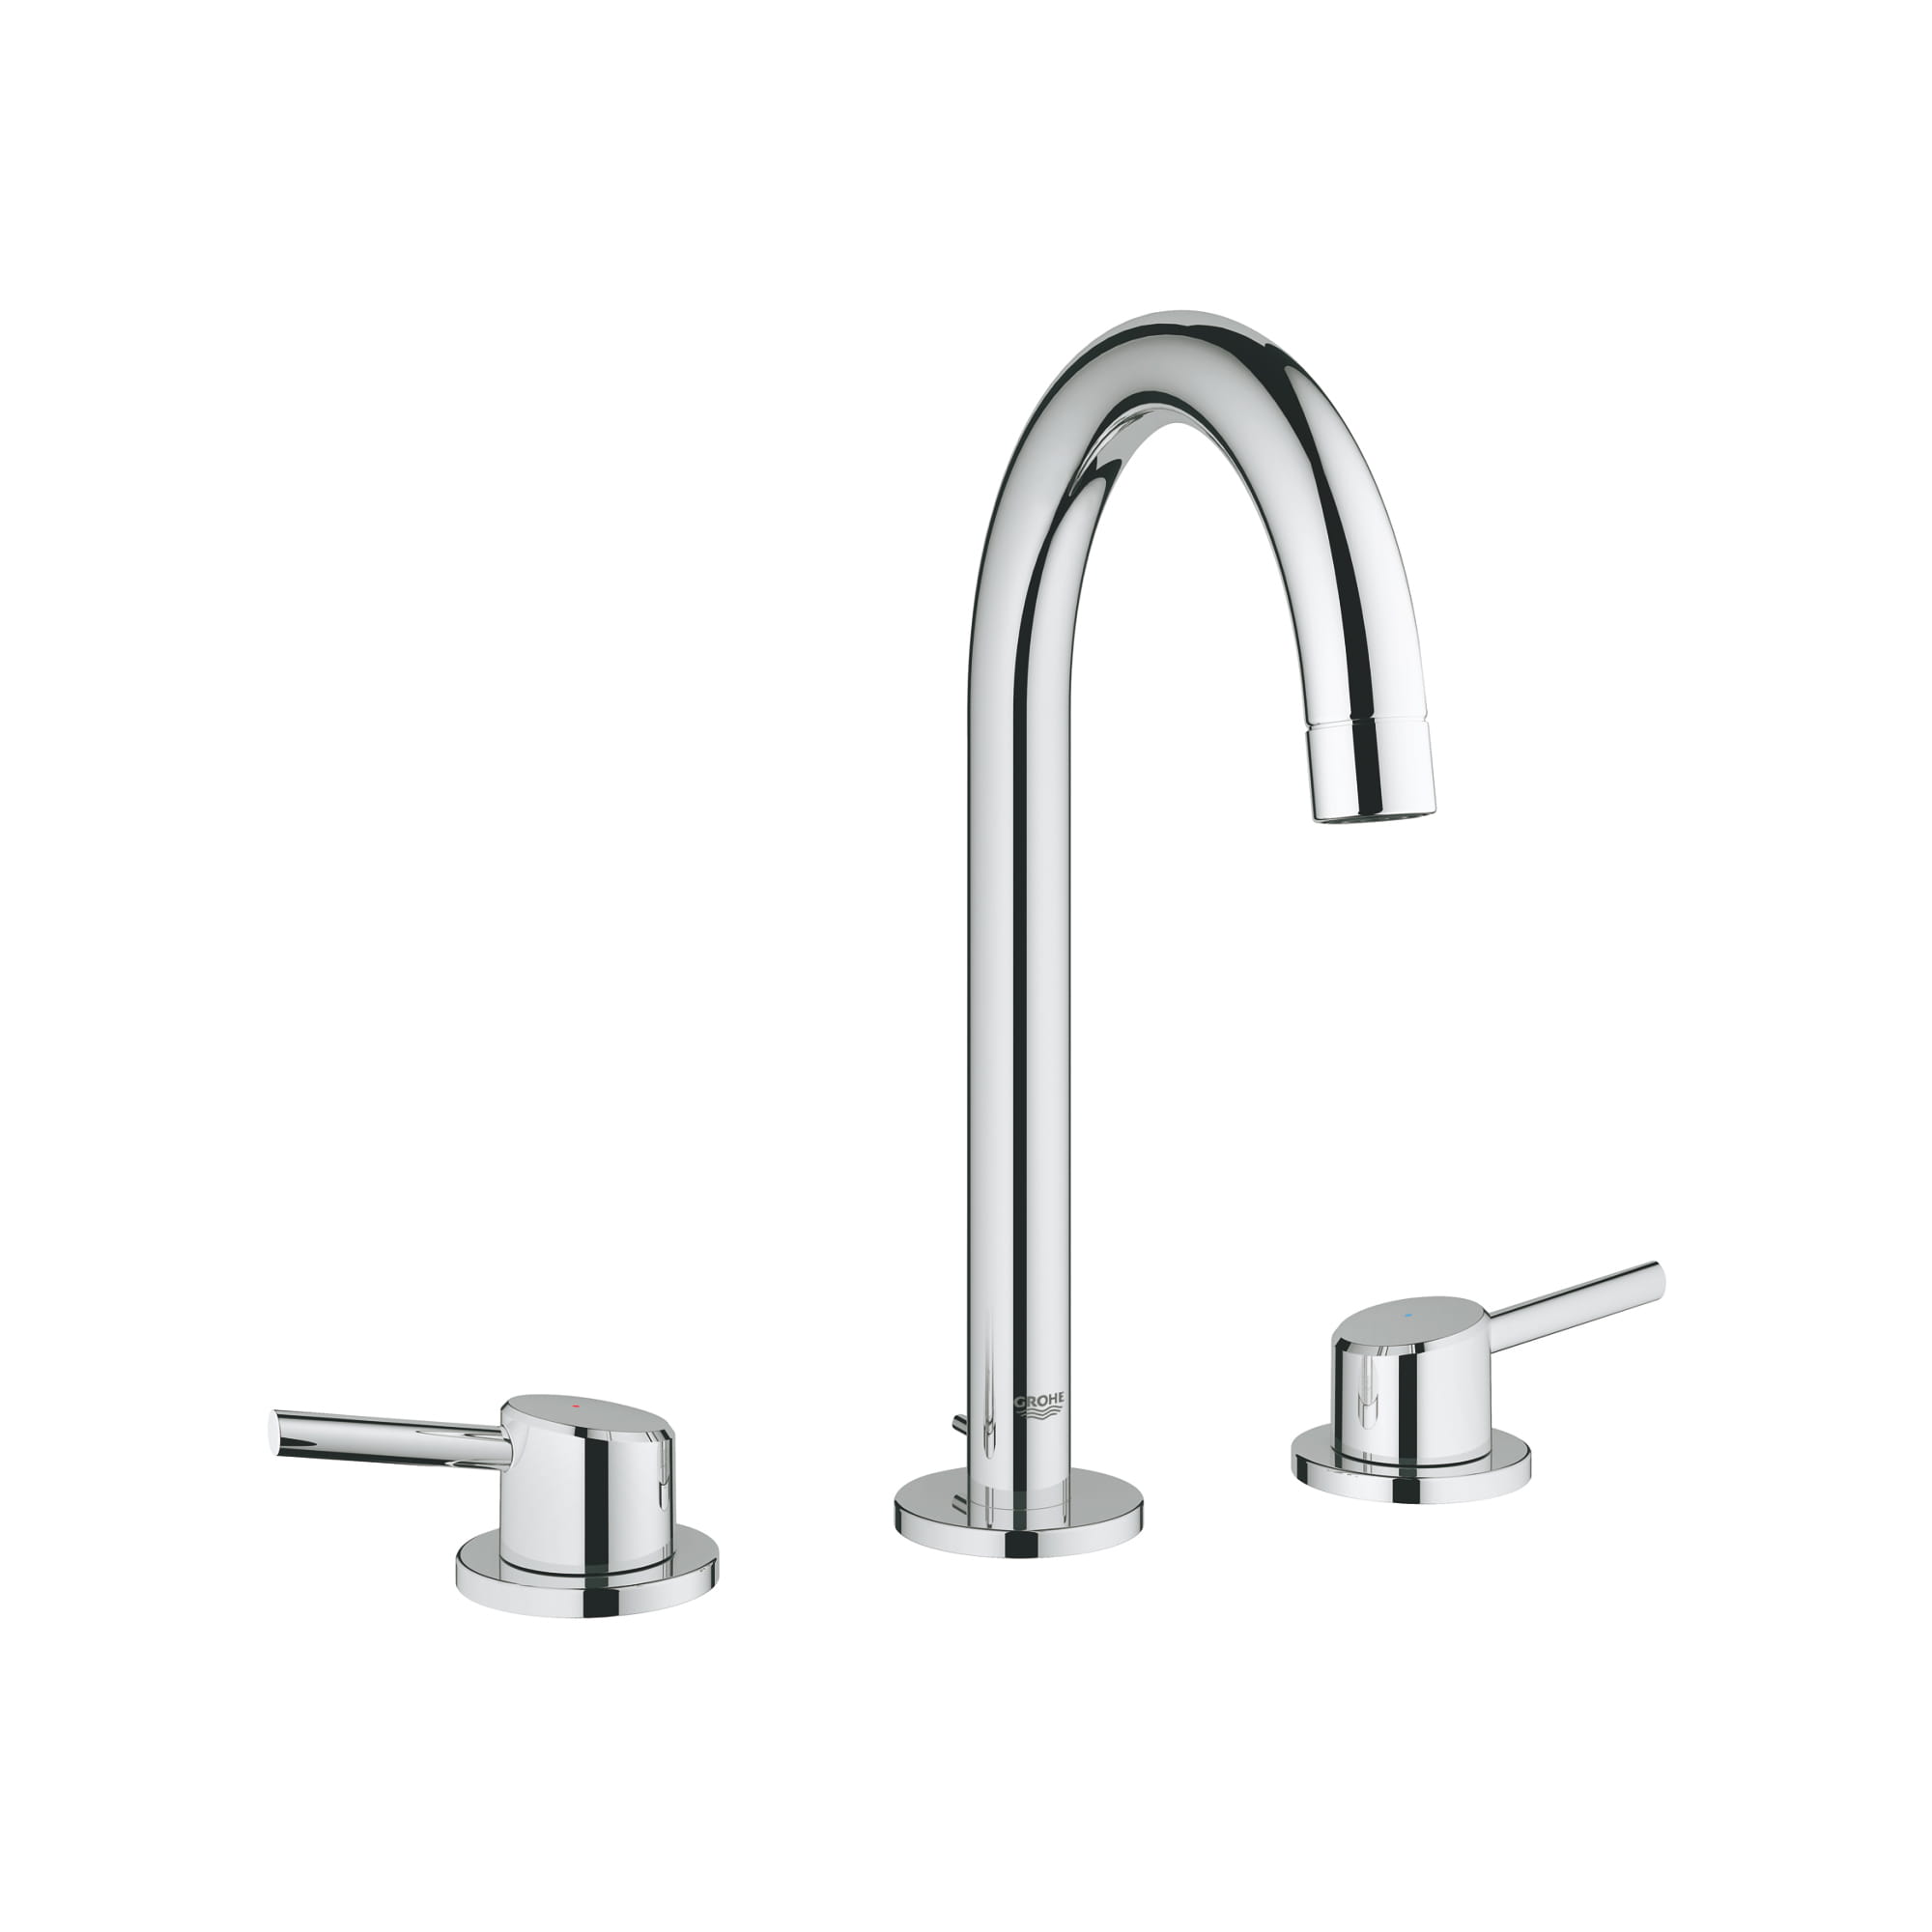 8-INCH WIDESPREAD 2-HANDLE L-SIZE BATHROOM FAUCET 1.2 GPM-related